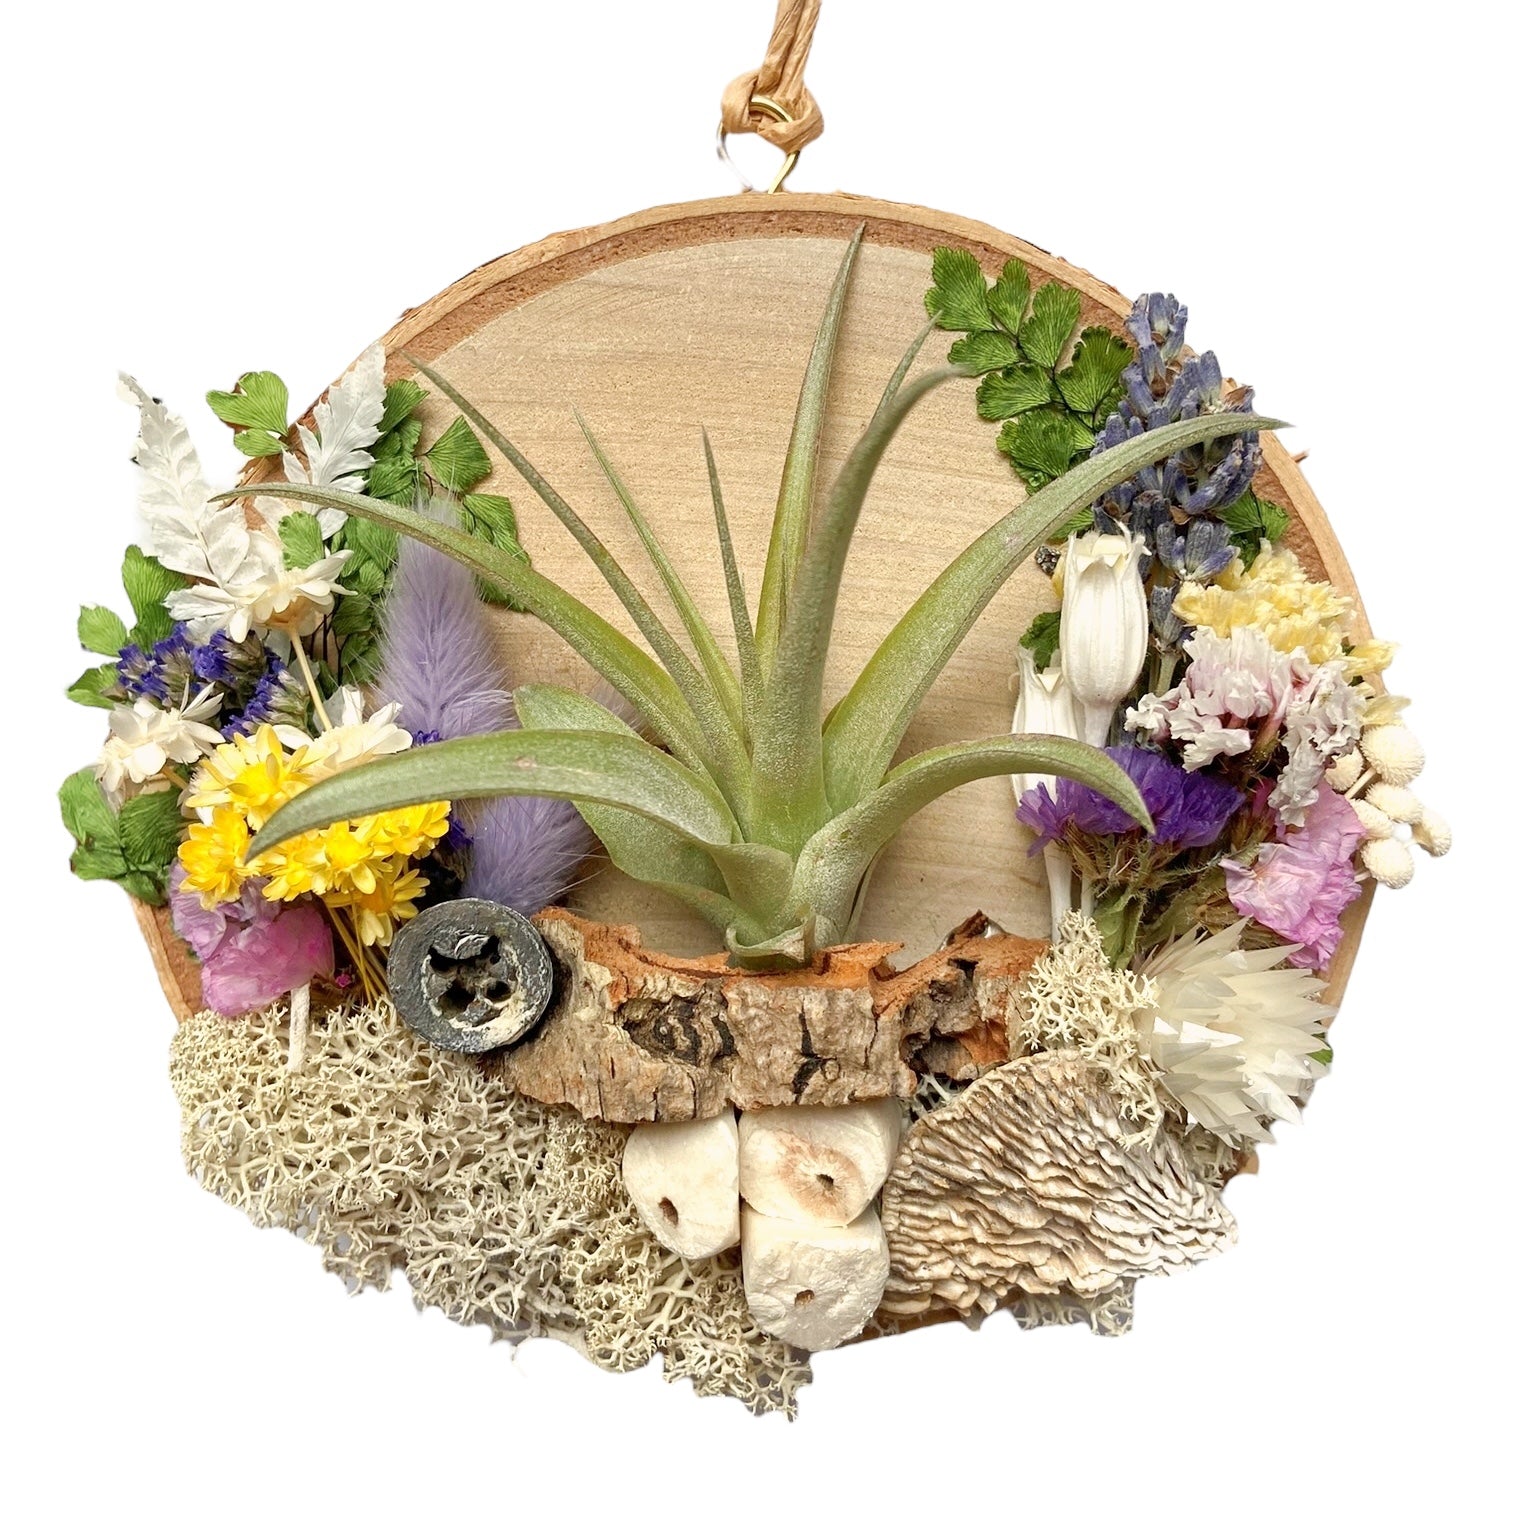 Birch wood plaque covered in dried flowers, moss, mushrooms and it includes an airplant